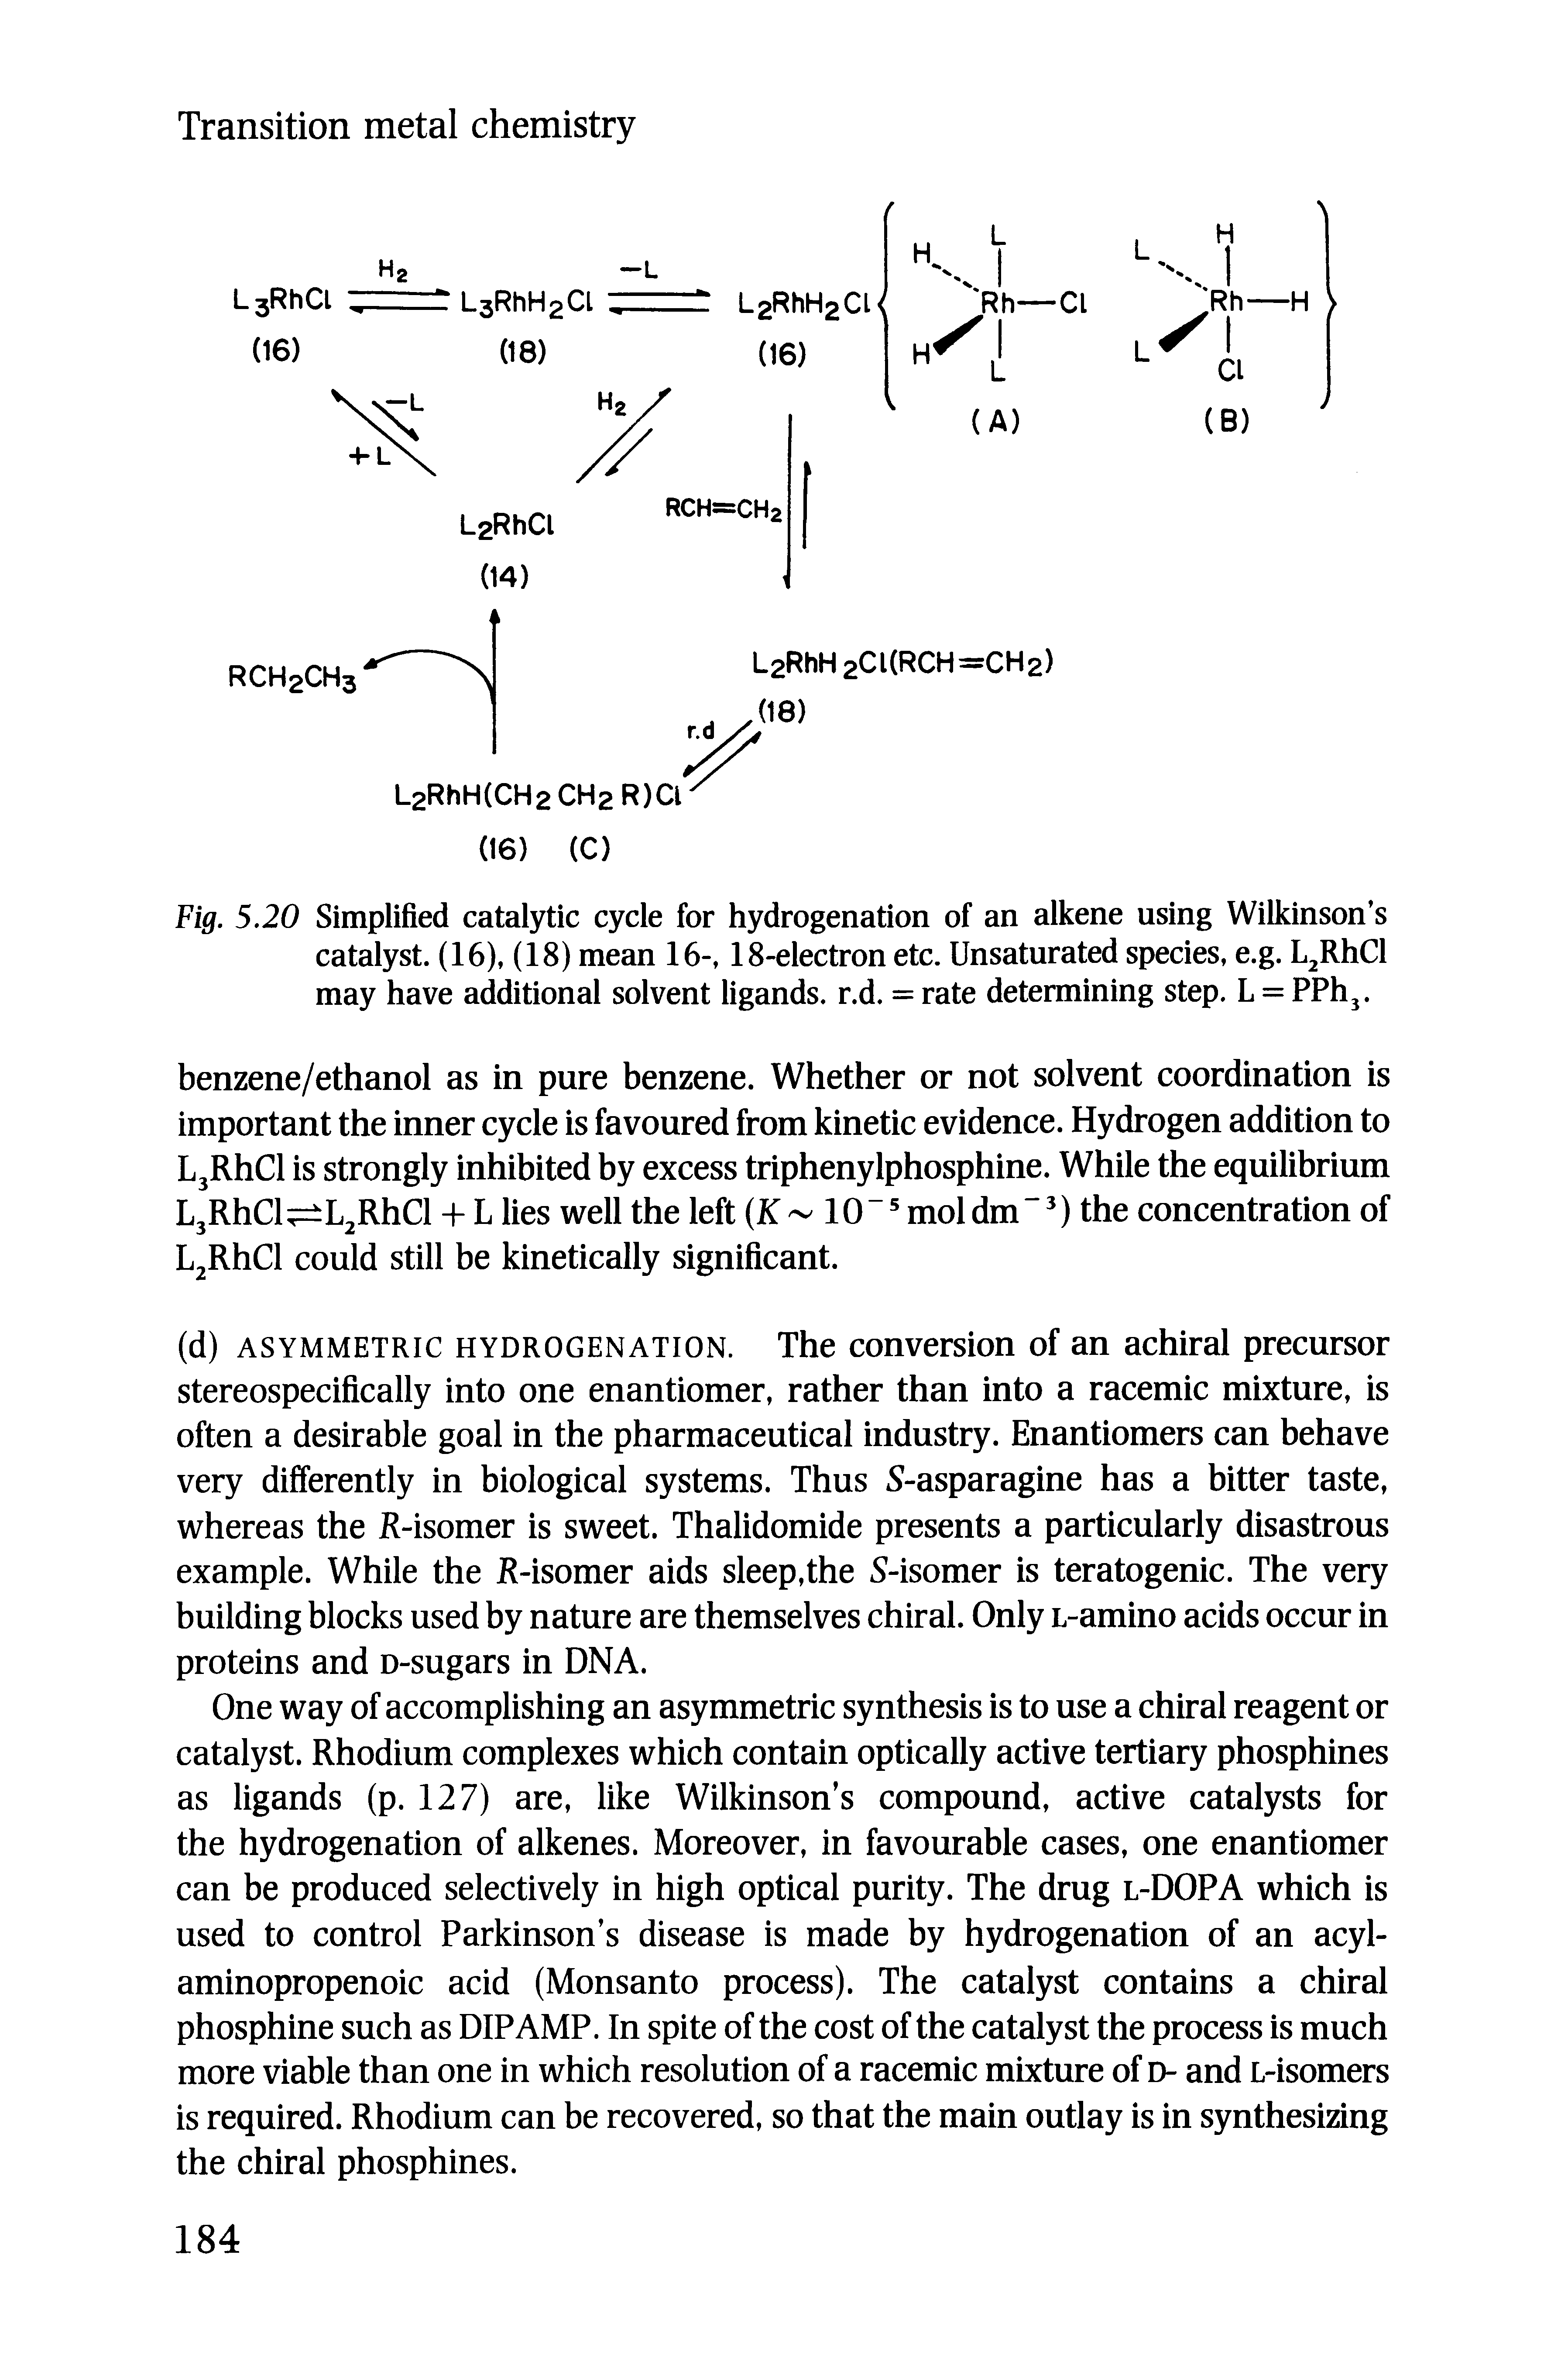 Fig. 5.20 Simplified catalytic cycle for hydrogenation of an alkene using Wilkinson s catalyst. (16), (18) mean 16-, 18-electron etc. Unsaturated species, e.g. L RhCl may have additional solvent ligands, r.d. = rate determining step. L = PPhj.